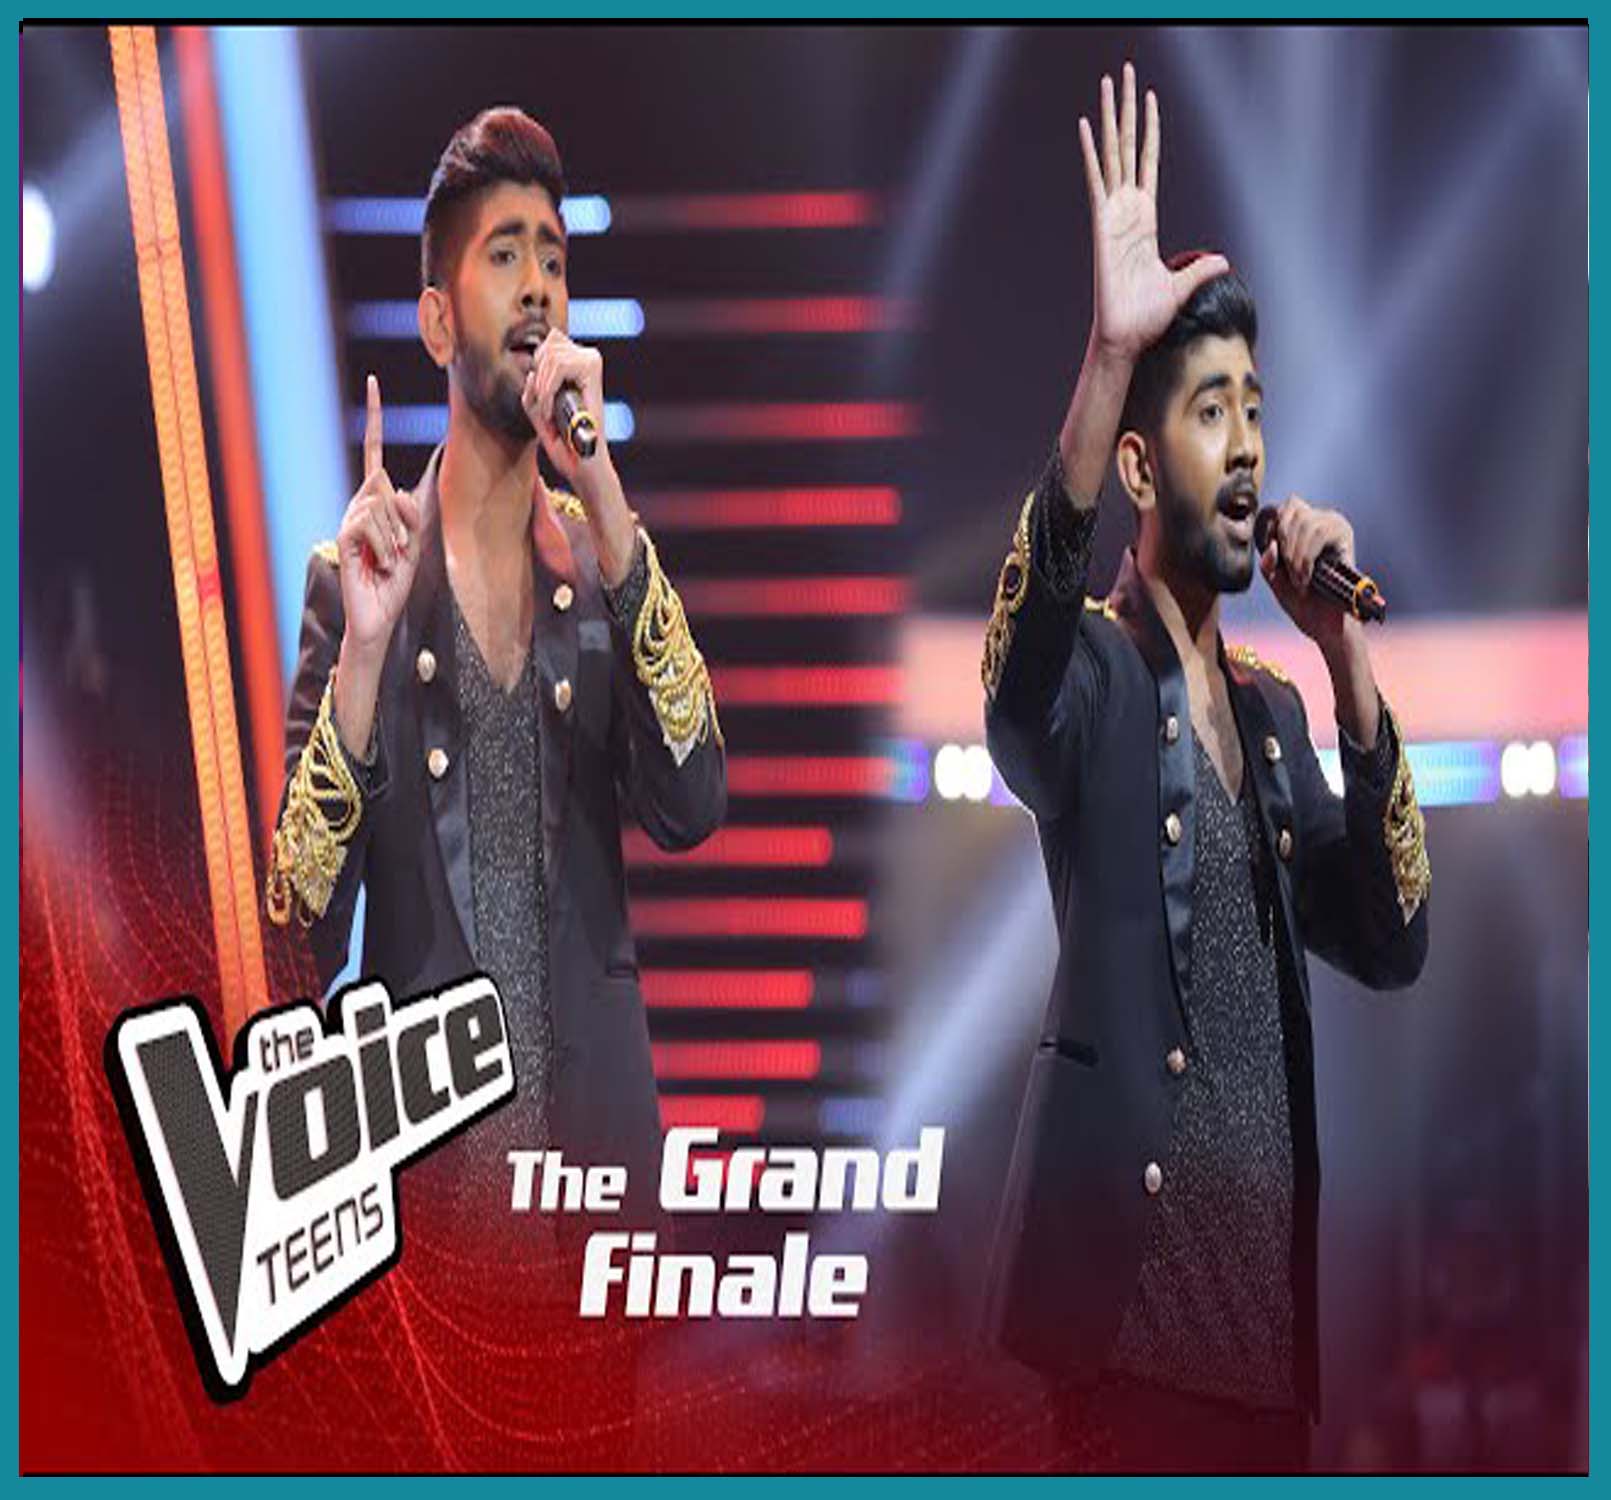 Thom Karuvil  (The Voice Teens Grand Finale)